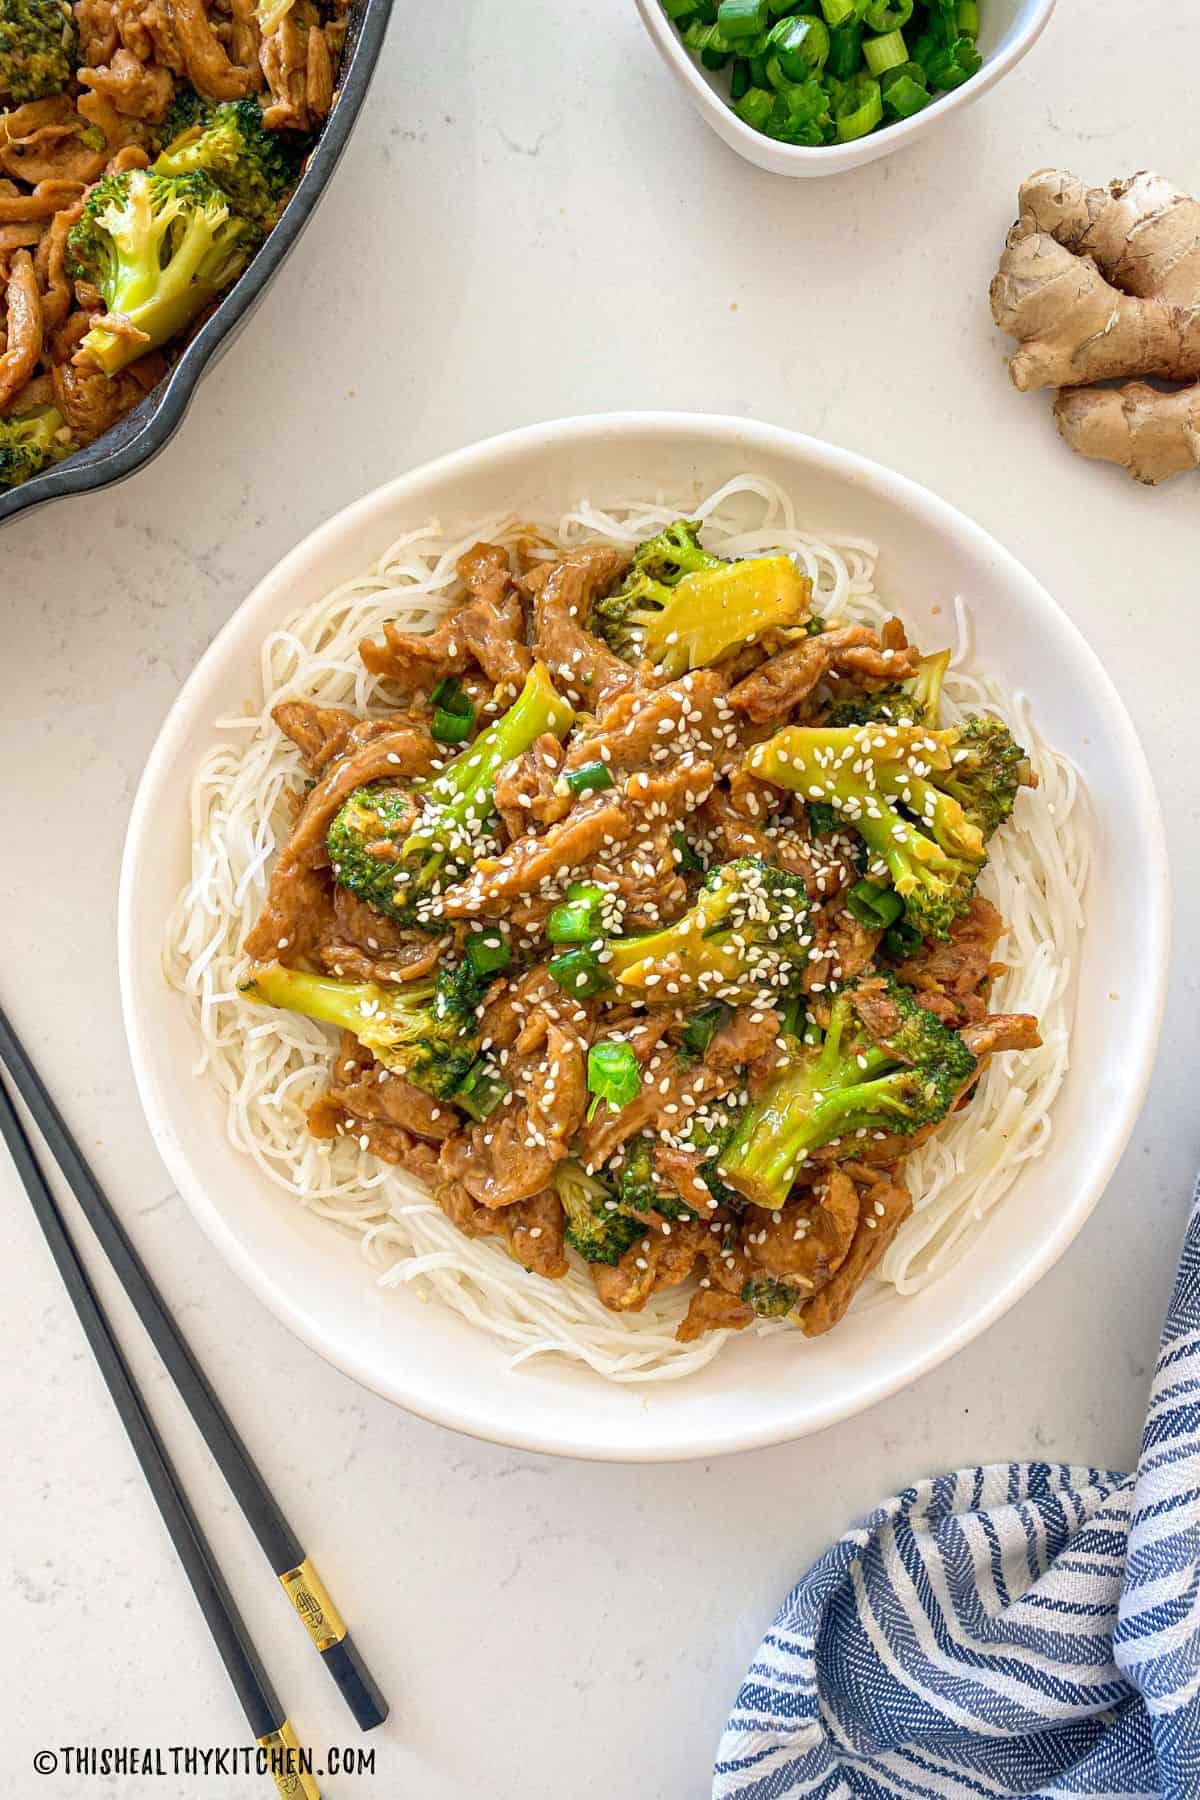 Plate with noodles and vegan beef and broccoli on top.